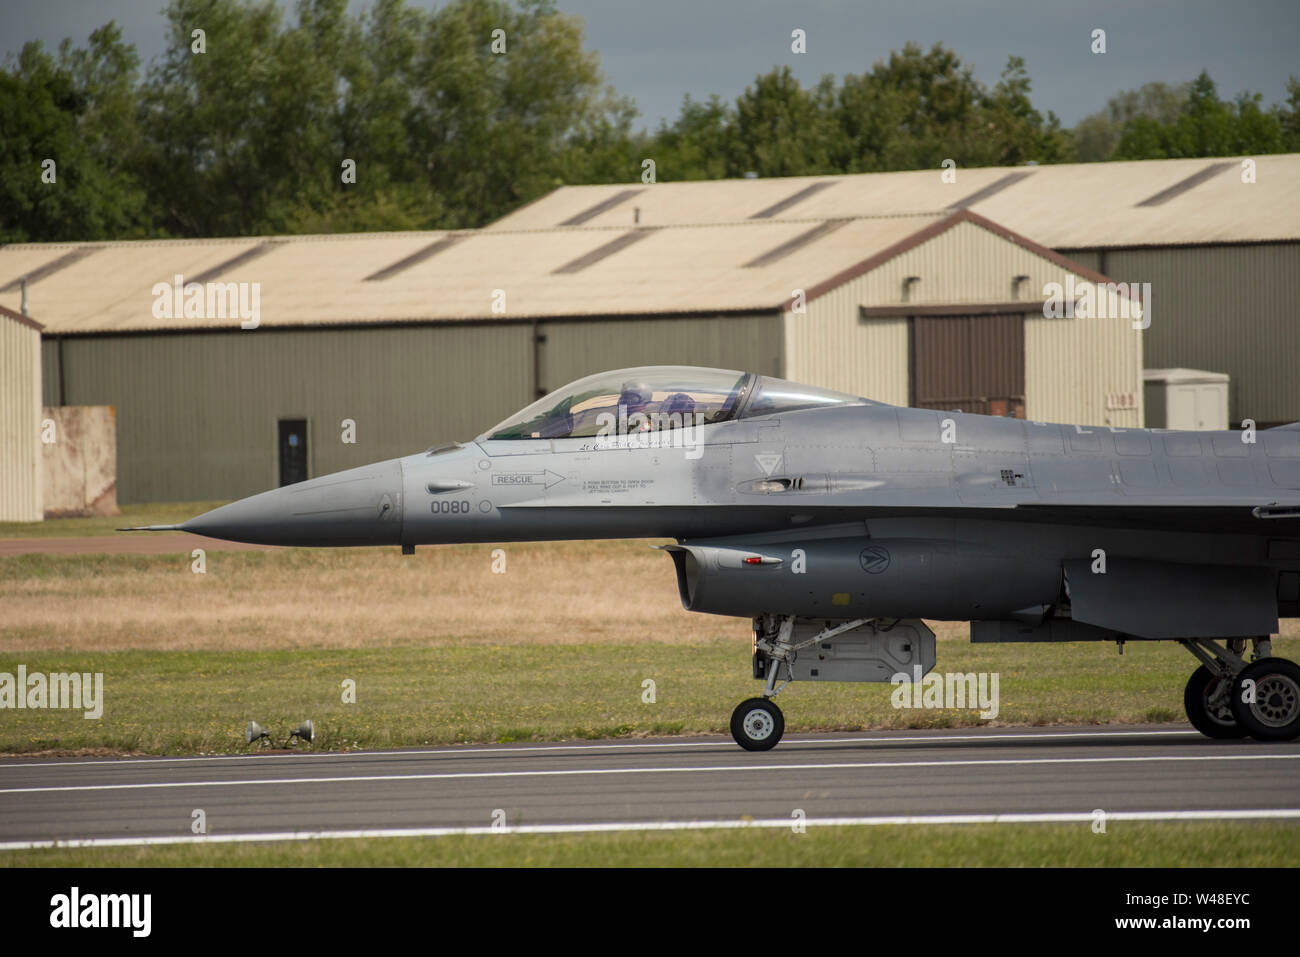 A member of the U.S. Air Force’s F-16 Viper Demonstration Team taxis on the runway during the 2019 Royal International Air Tattoo at RAF Fairford, England, July 20, 2019. This year, RIAT commemorated the 70th anniversary of NATO and highlighted the United States' enduring commitment to its European allies. (U.S. Air Force photo by Tech Sgt. Aaron Thomasson) Stock Photo